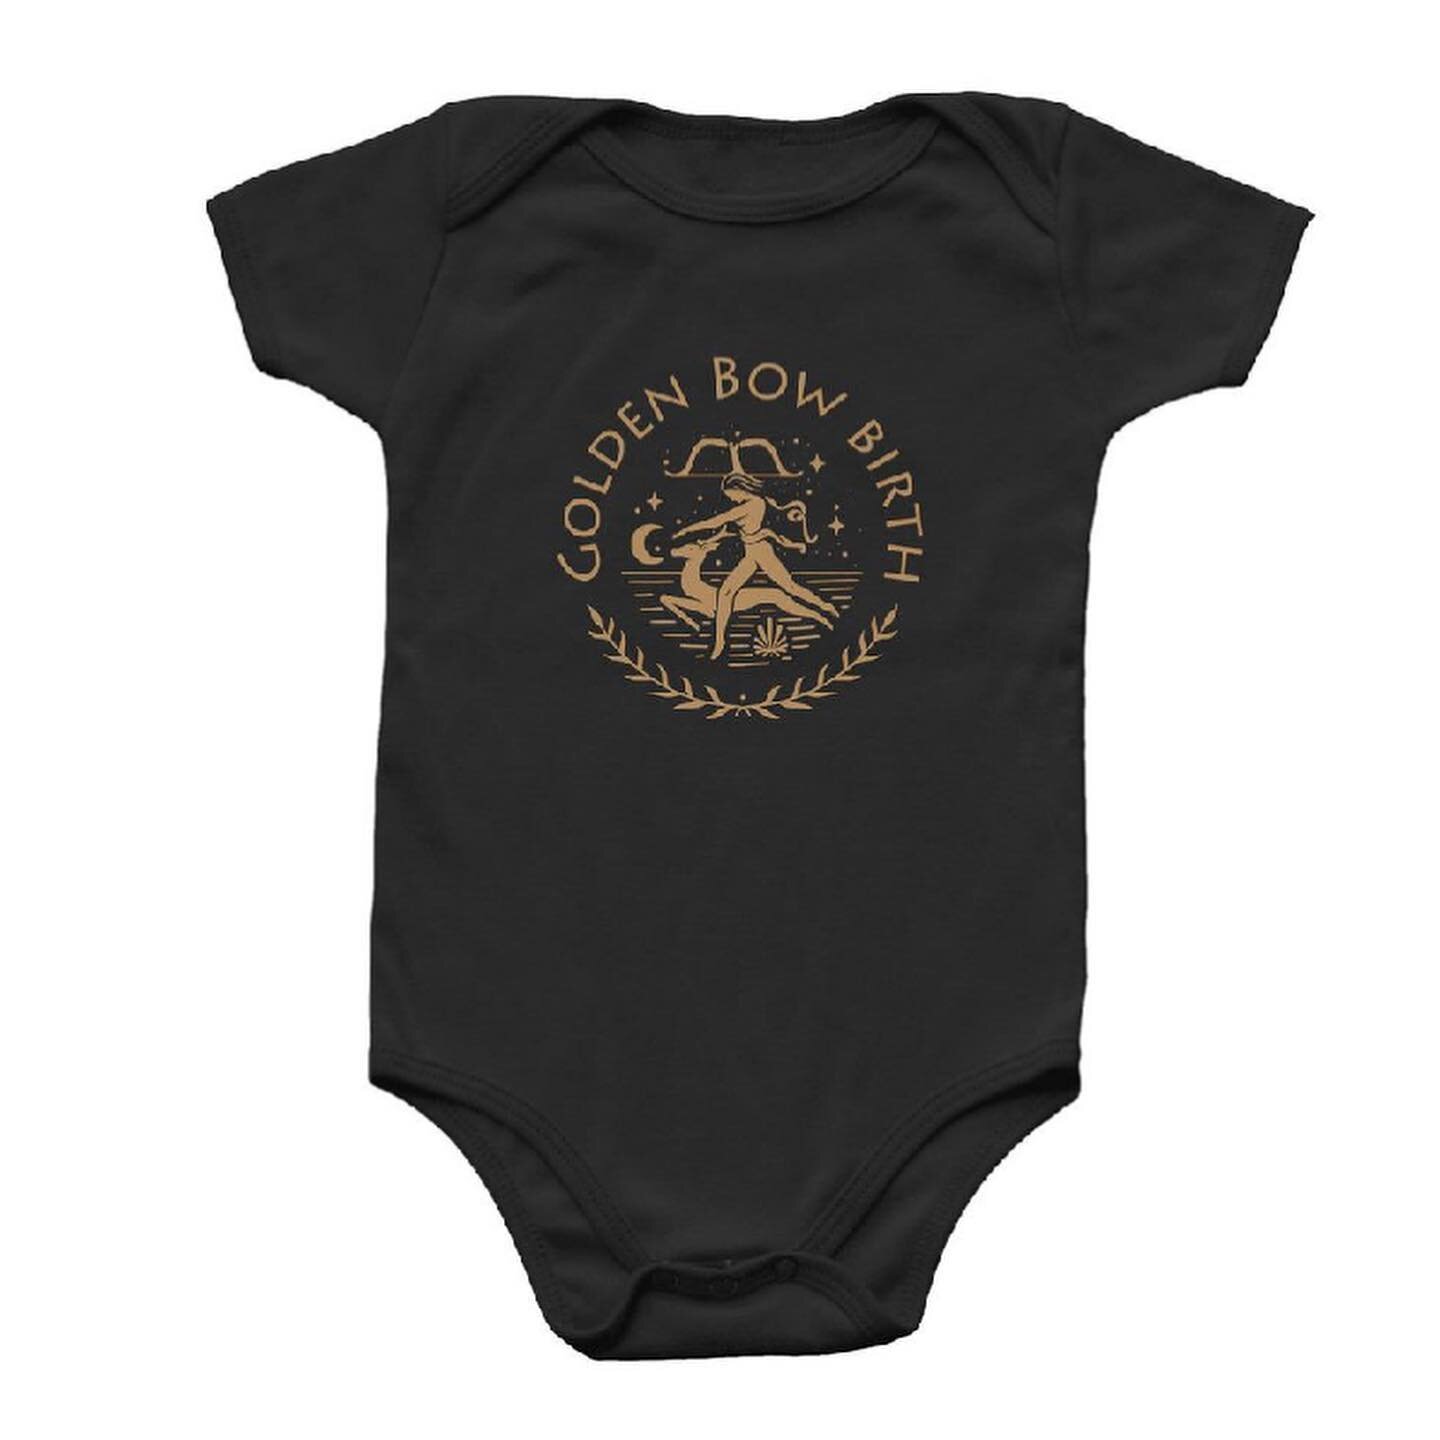 Ok I did it! Despite feeling very embarrassed by the idea of having merch lol I love my logo and branding and LOVE seeing babies in these onesies!

I opened up a bonfire campaign, so for the next 15 days you can buy some fun stuff (tank top, sweatshi